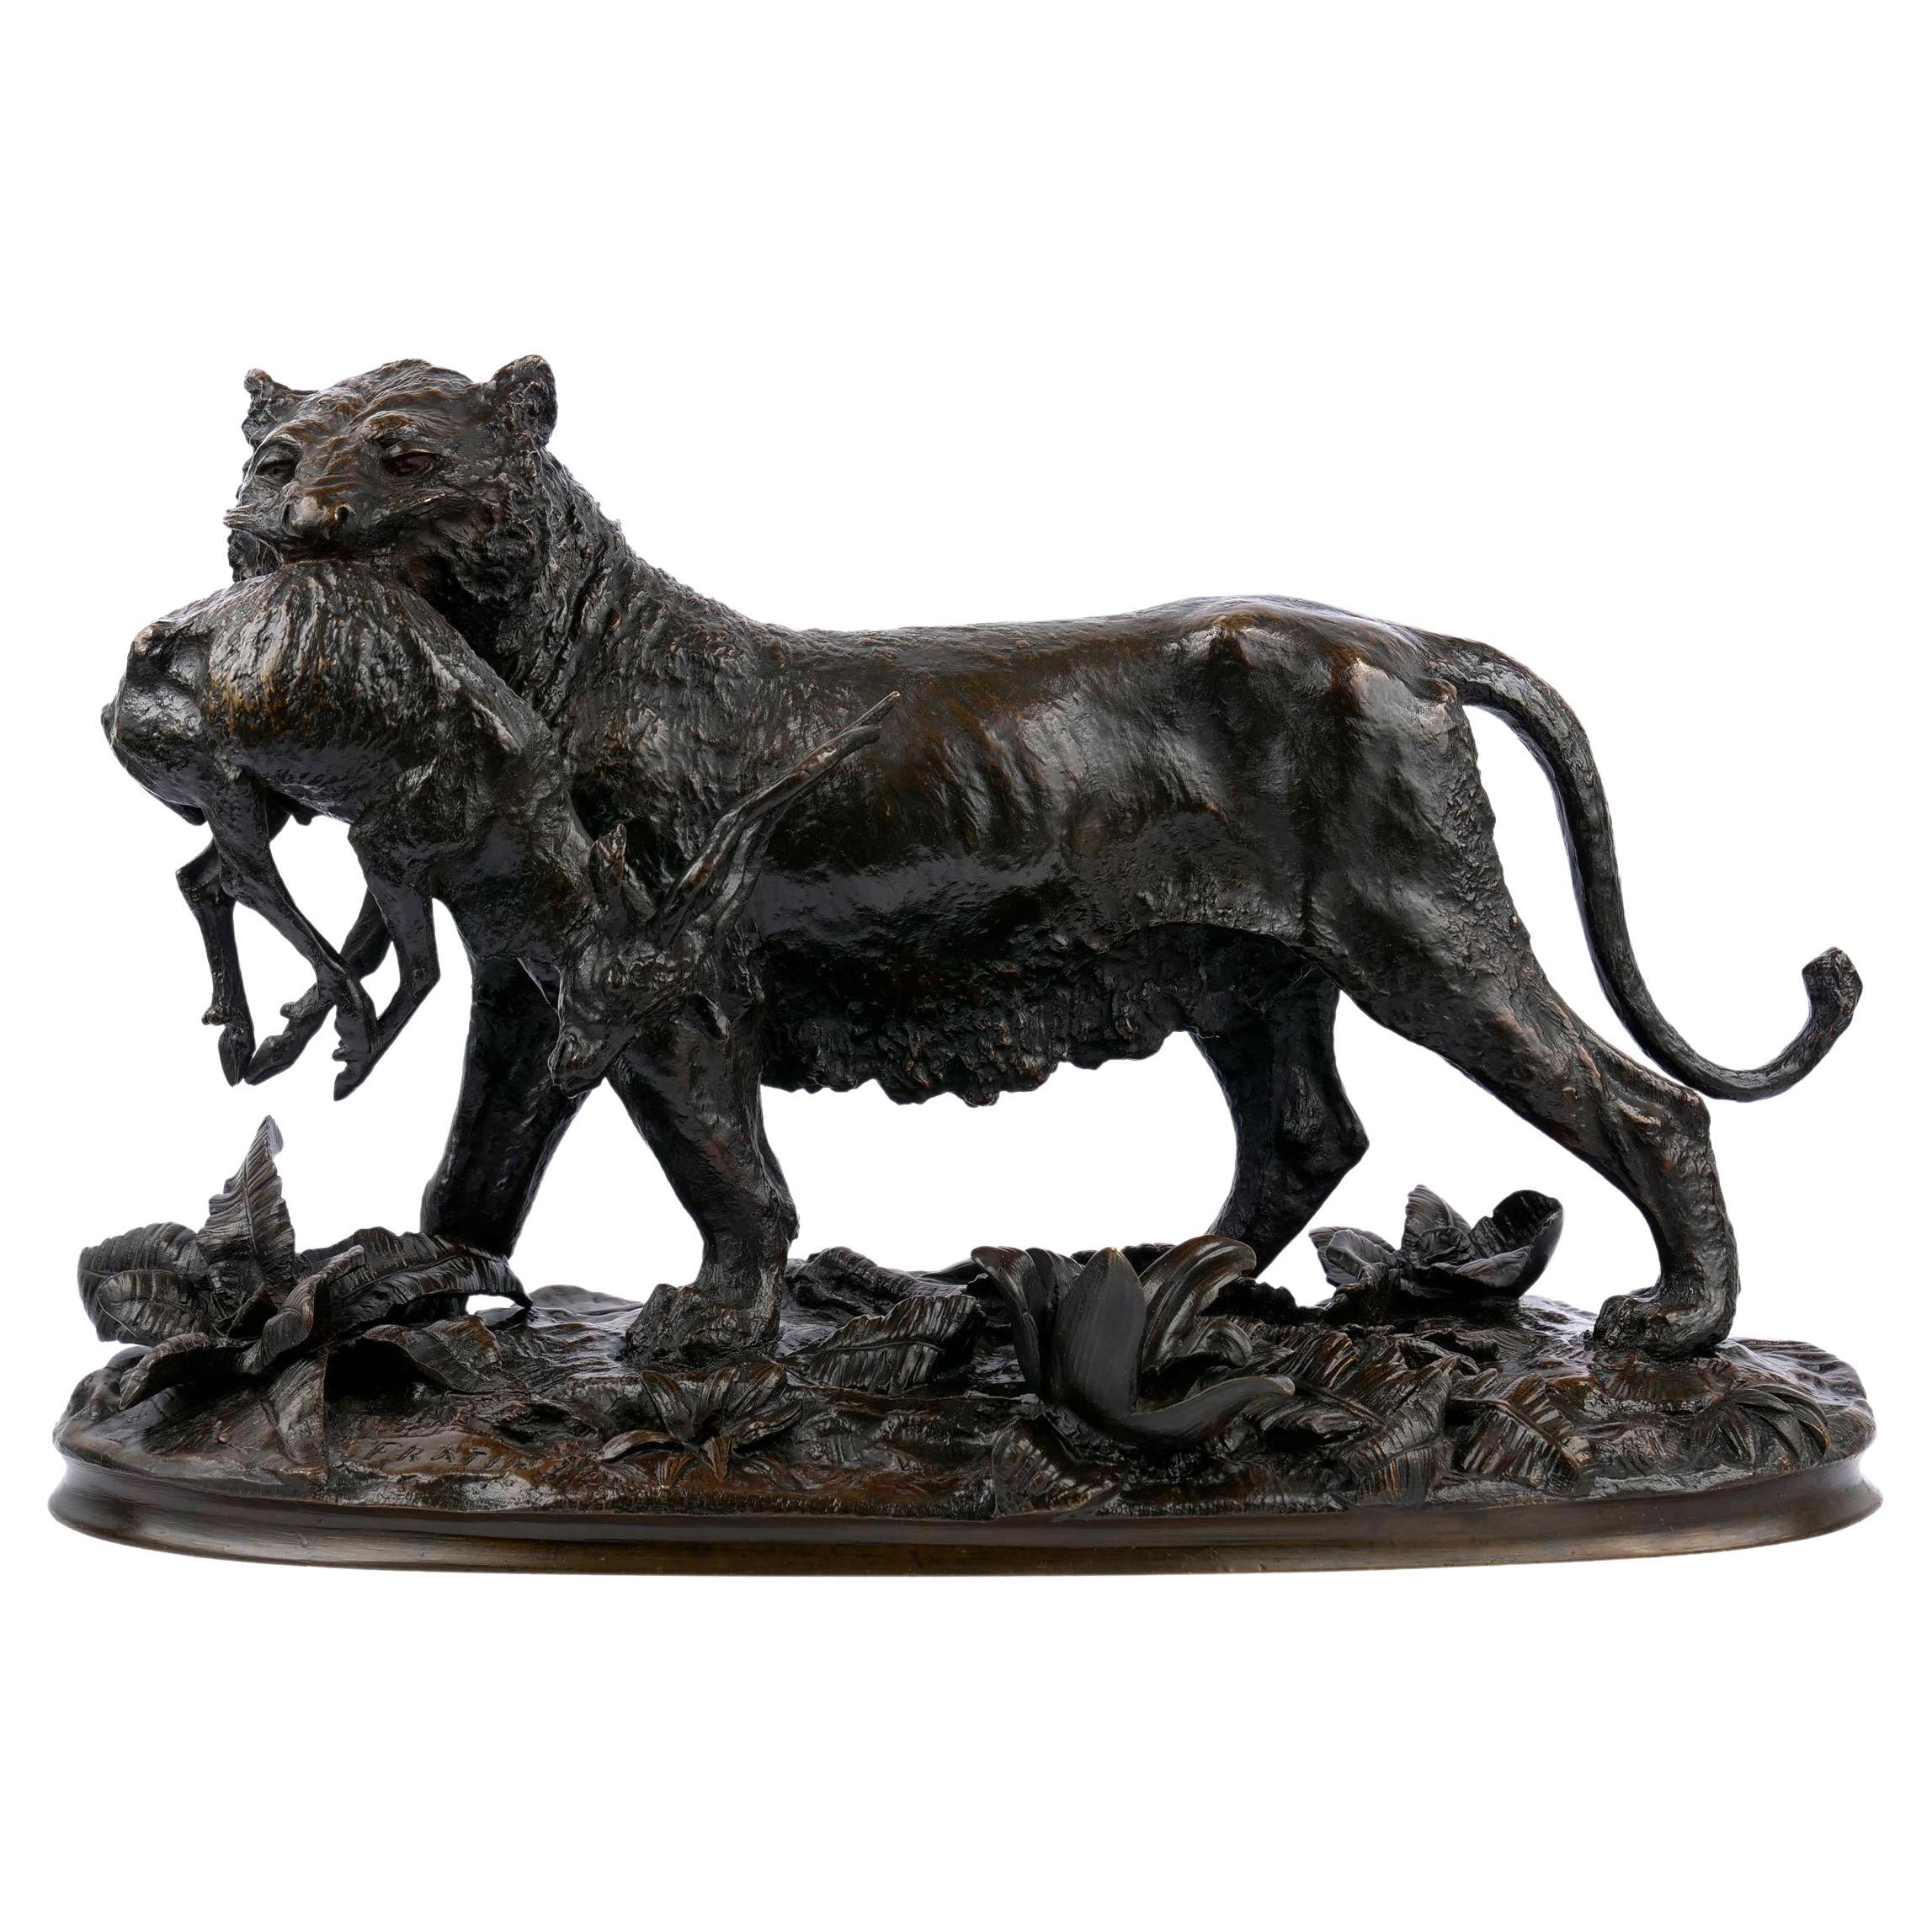 “Lioness Carrying an Antelope” French Bronze Sculpture by Christophe Fratin